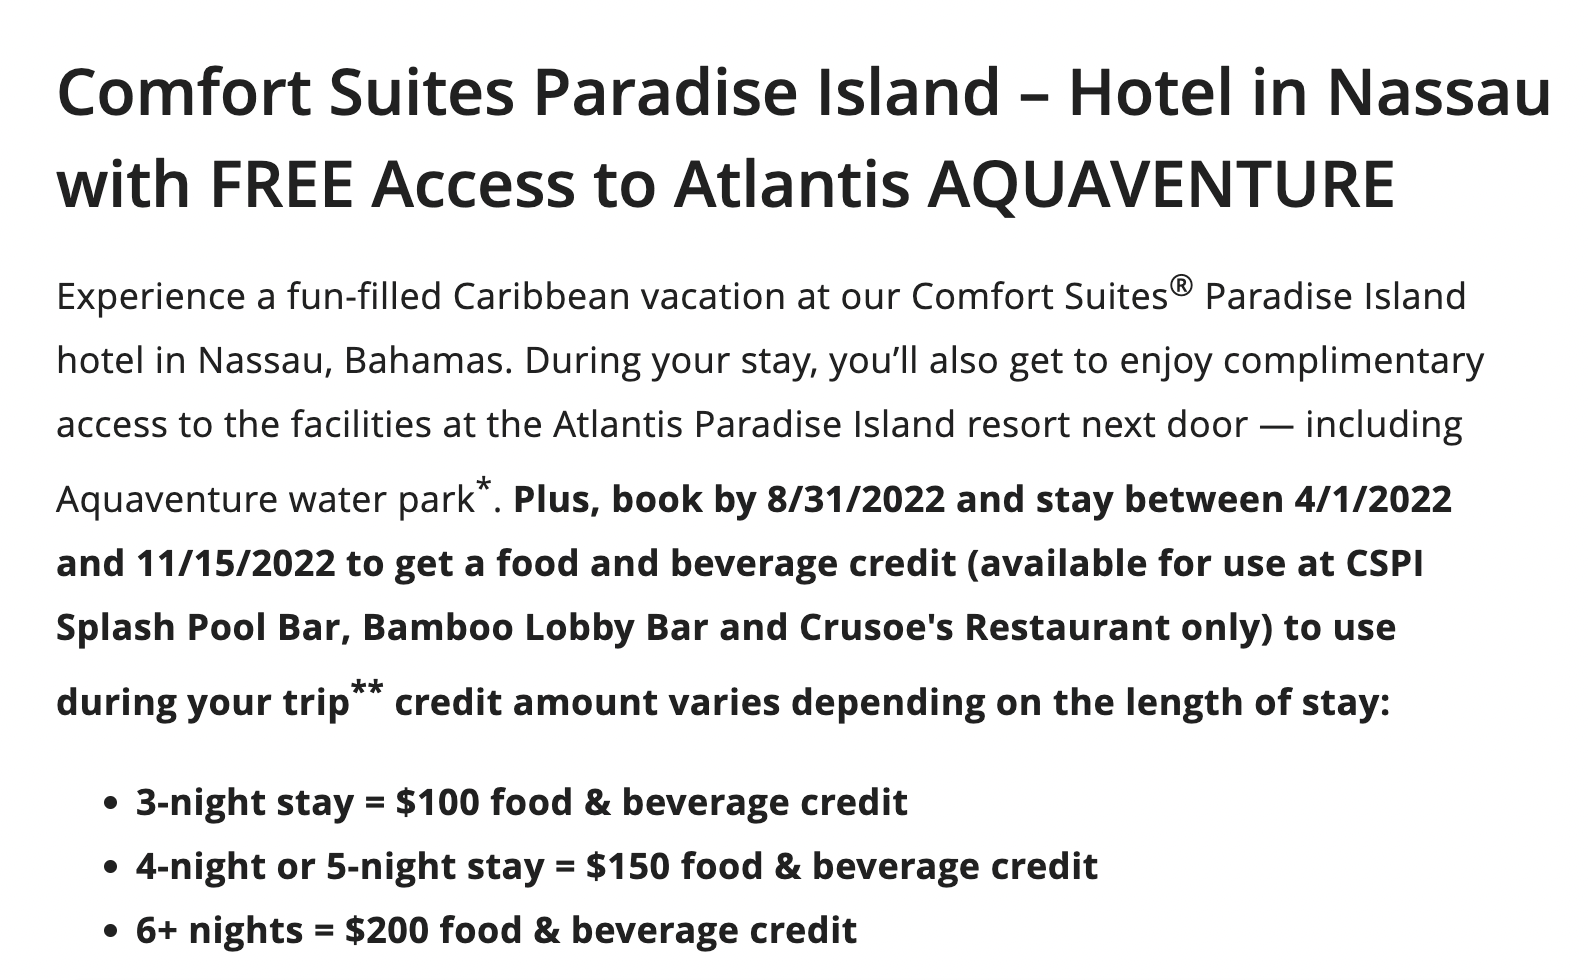 Choice hotels offer